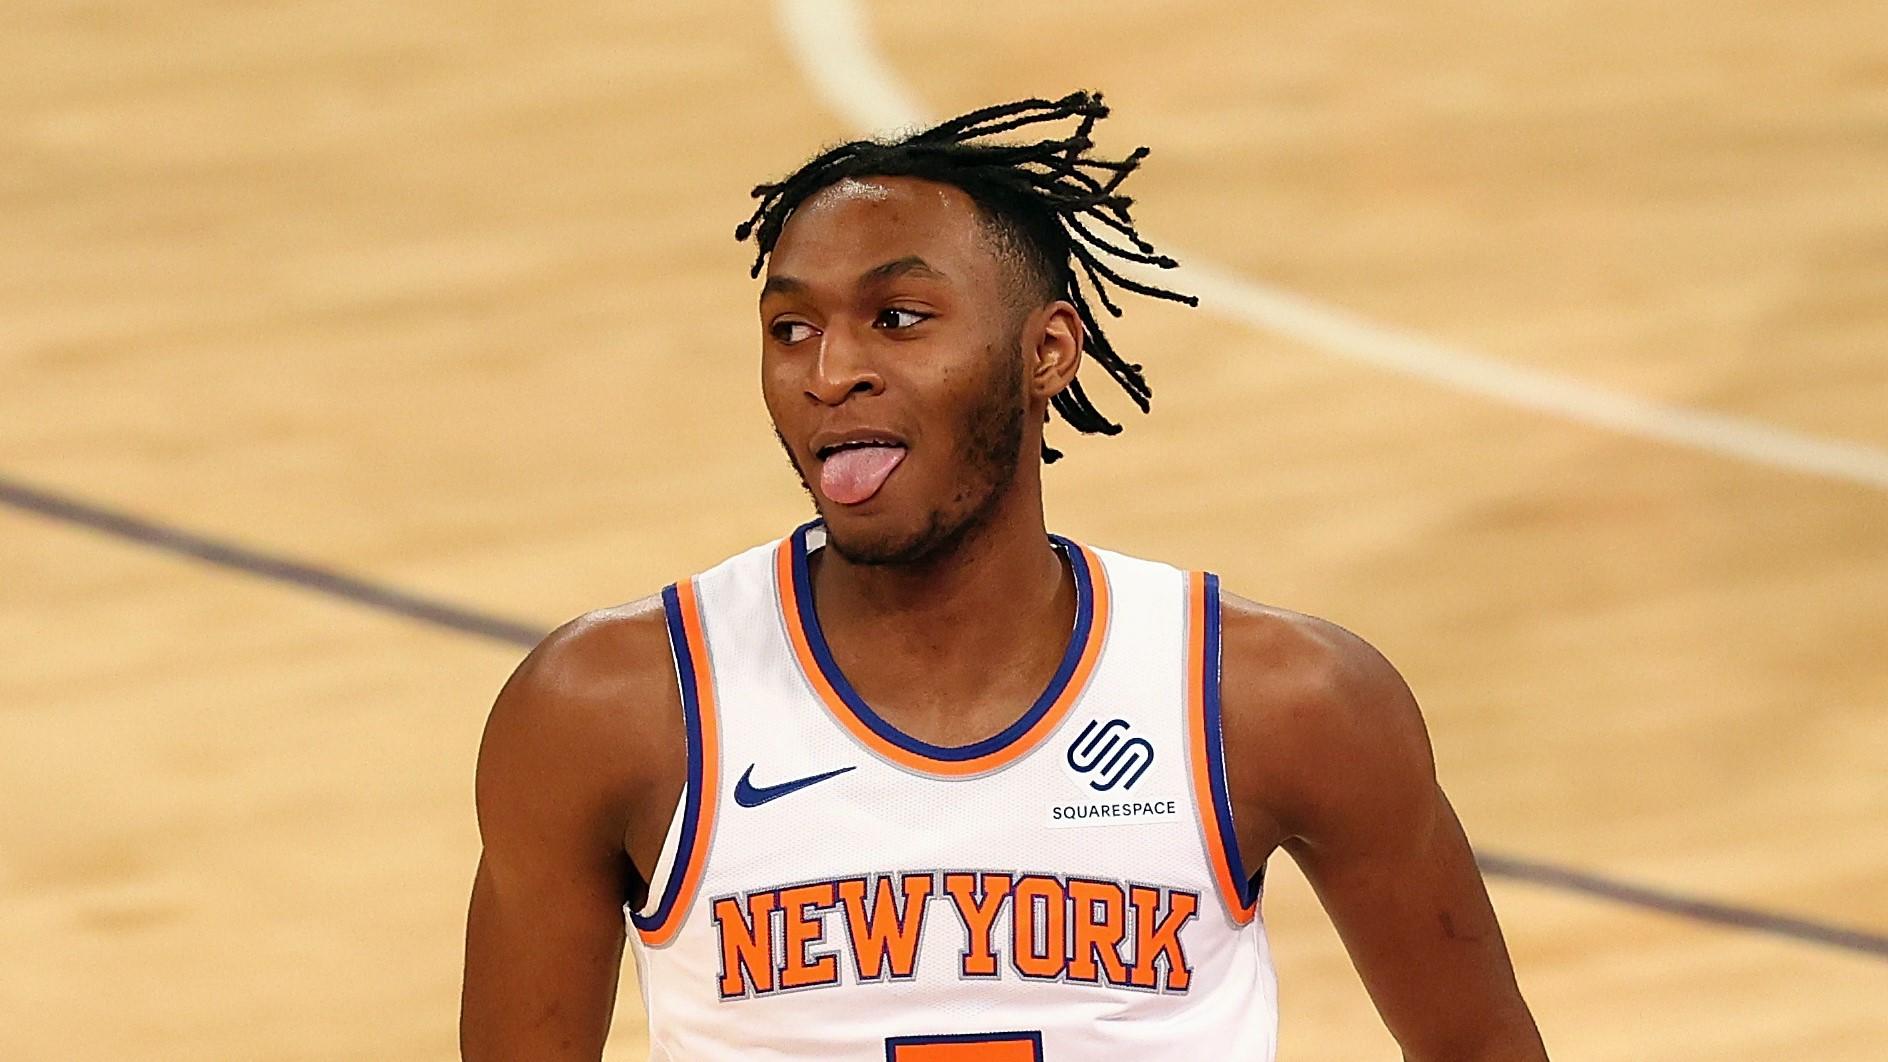 Mar 29, 2021; New York, New York, USA; New York Knicks guard Immanuel Quickley (5) reacts after hitting a three point basket against the Miami Heat at Madison Square Garden. / Mike Stobe/POOL PHOTOS-USA TODAY Sports